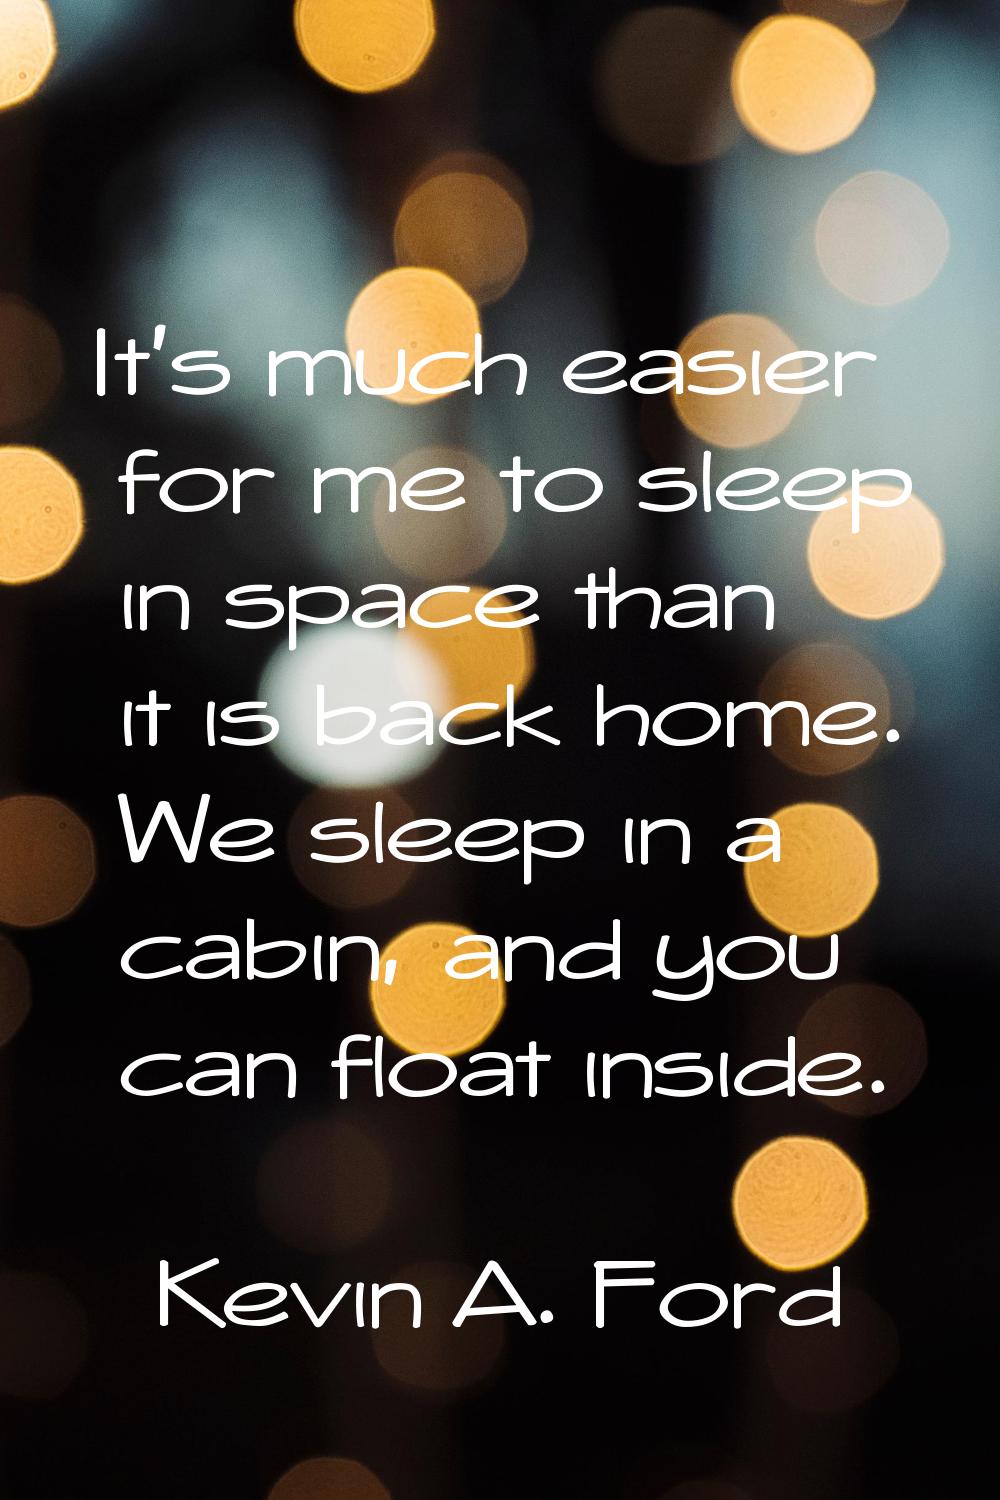 It's much easier for me to sleep in space than it is back home. We sleep in a cabin, and you can fl